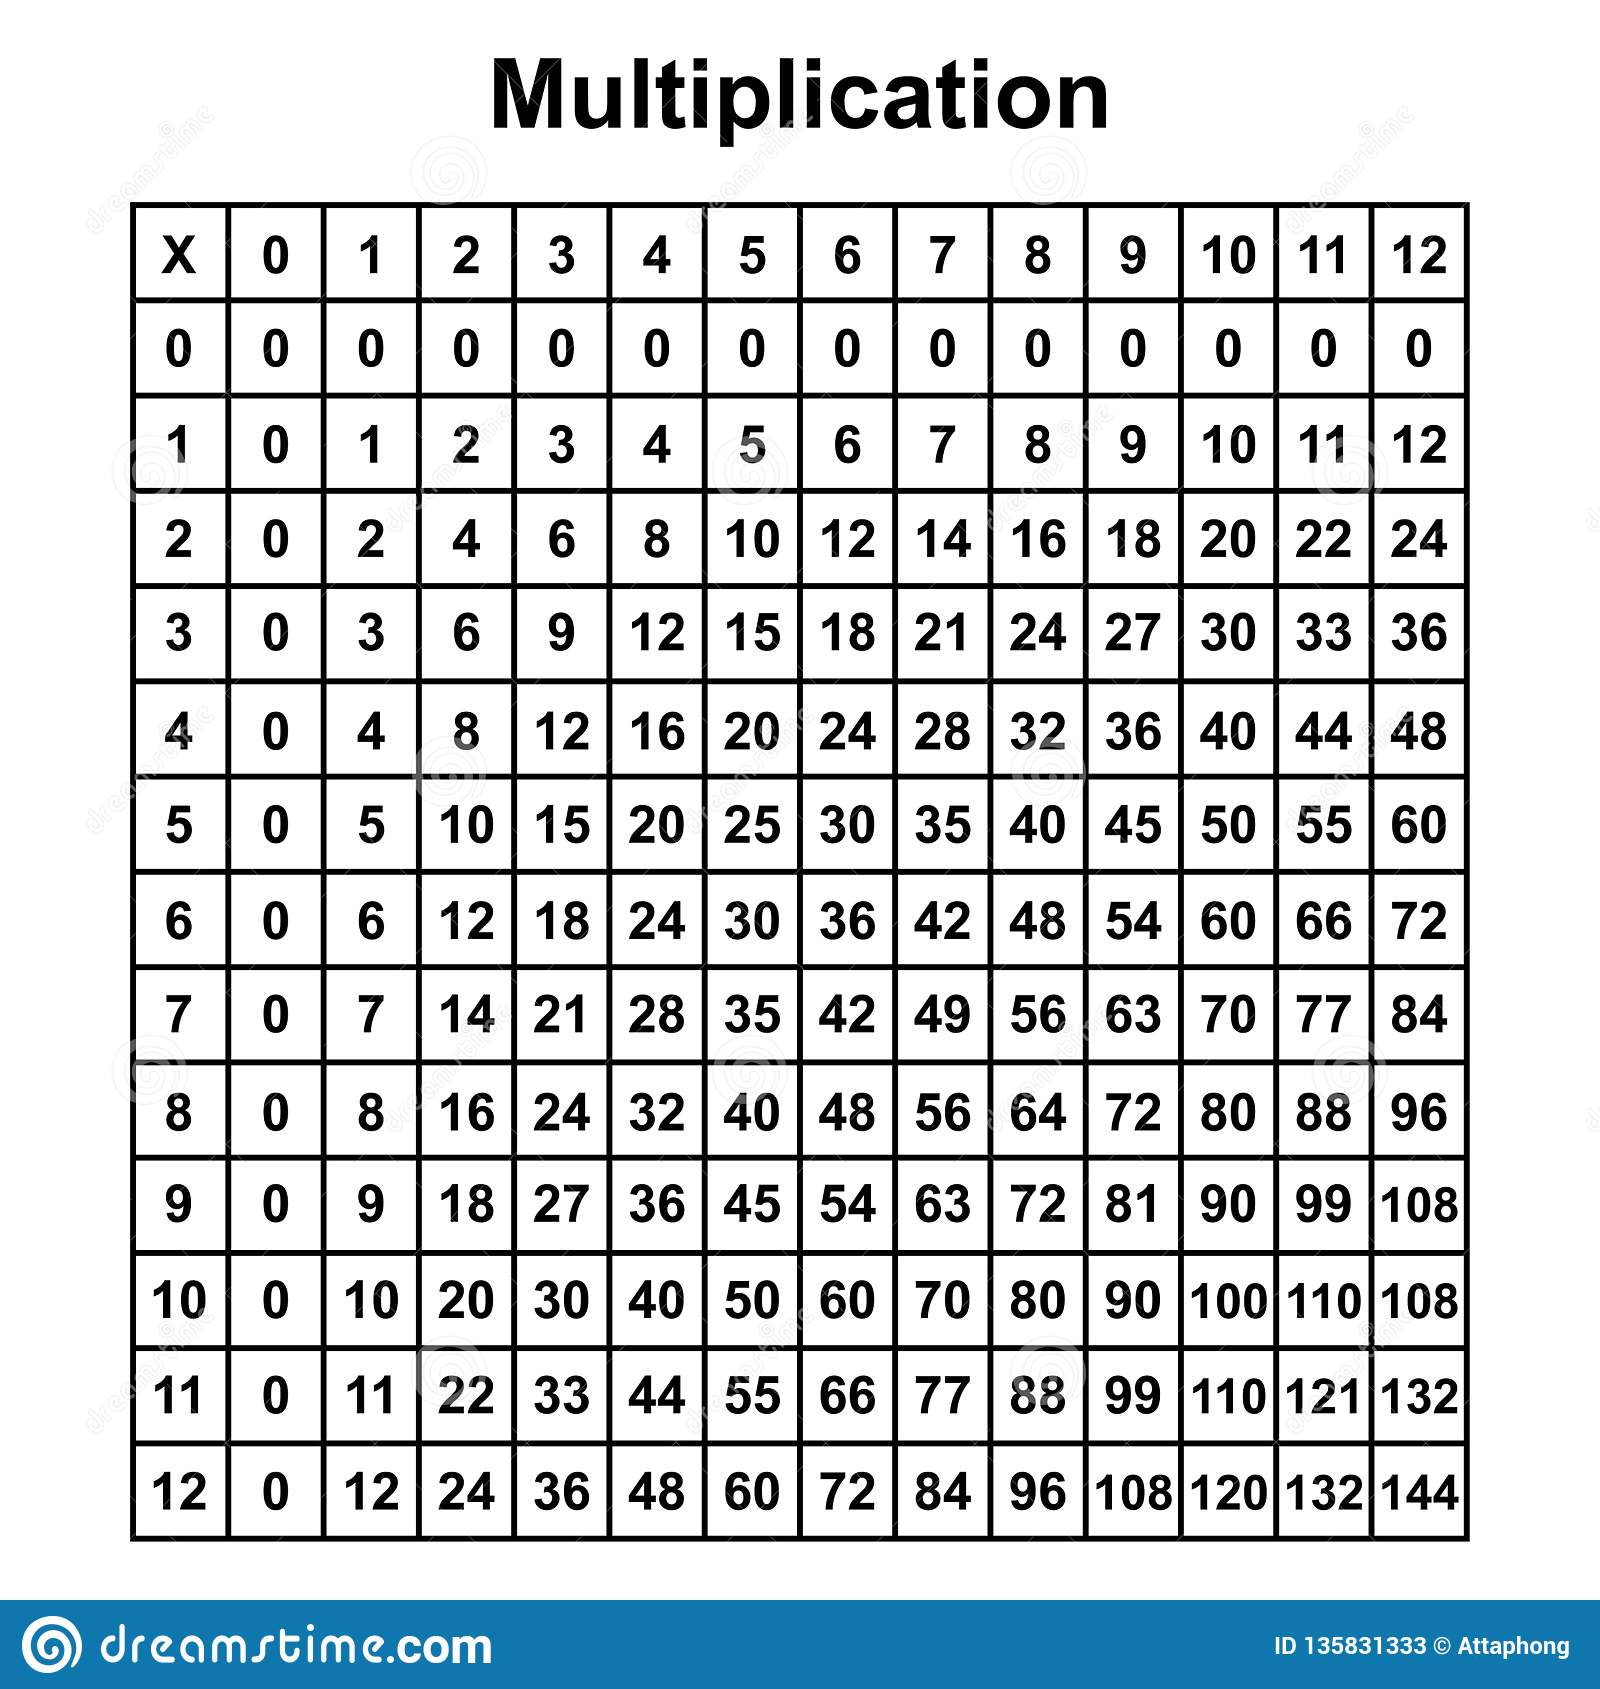 Multiplication Table Chart Or Multiplication Table Printable for Printable Multiplication Table